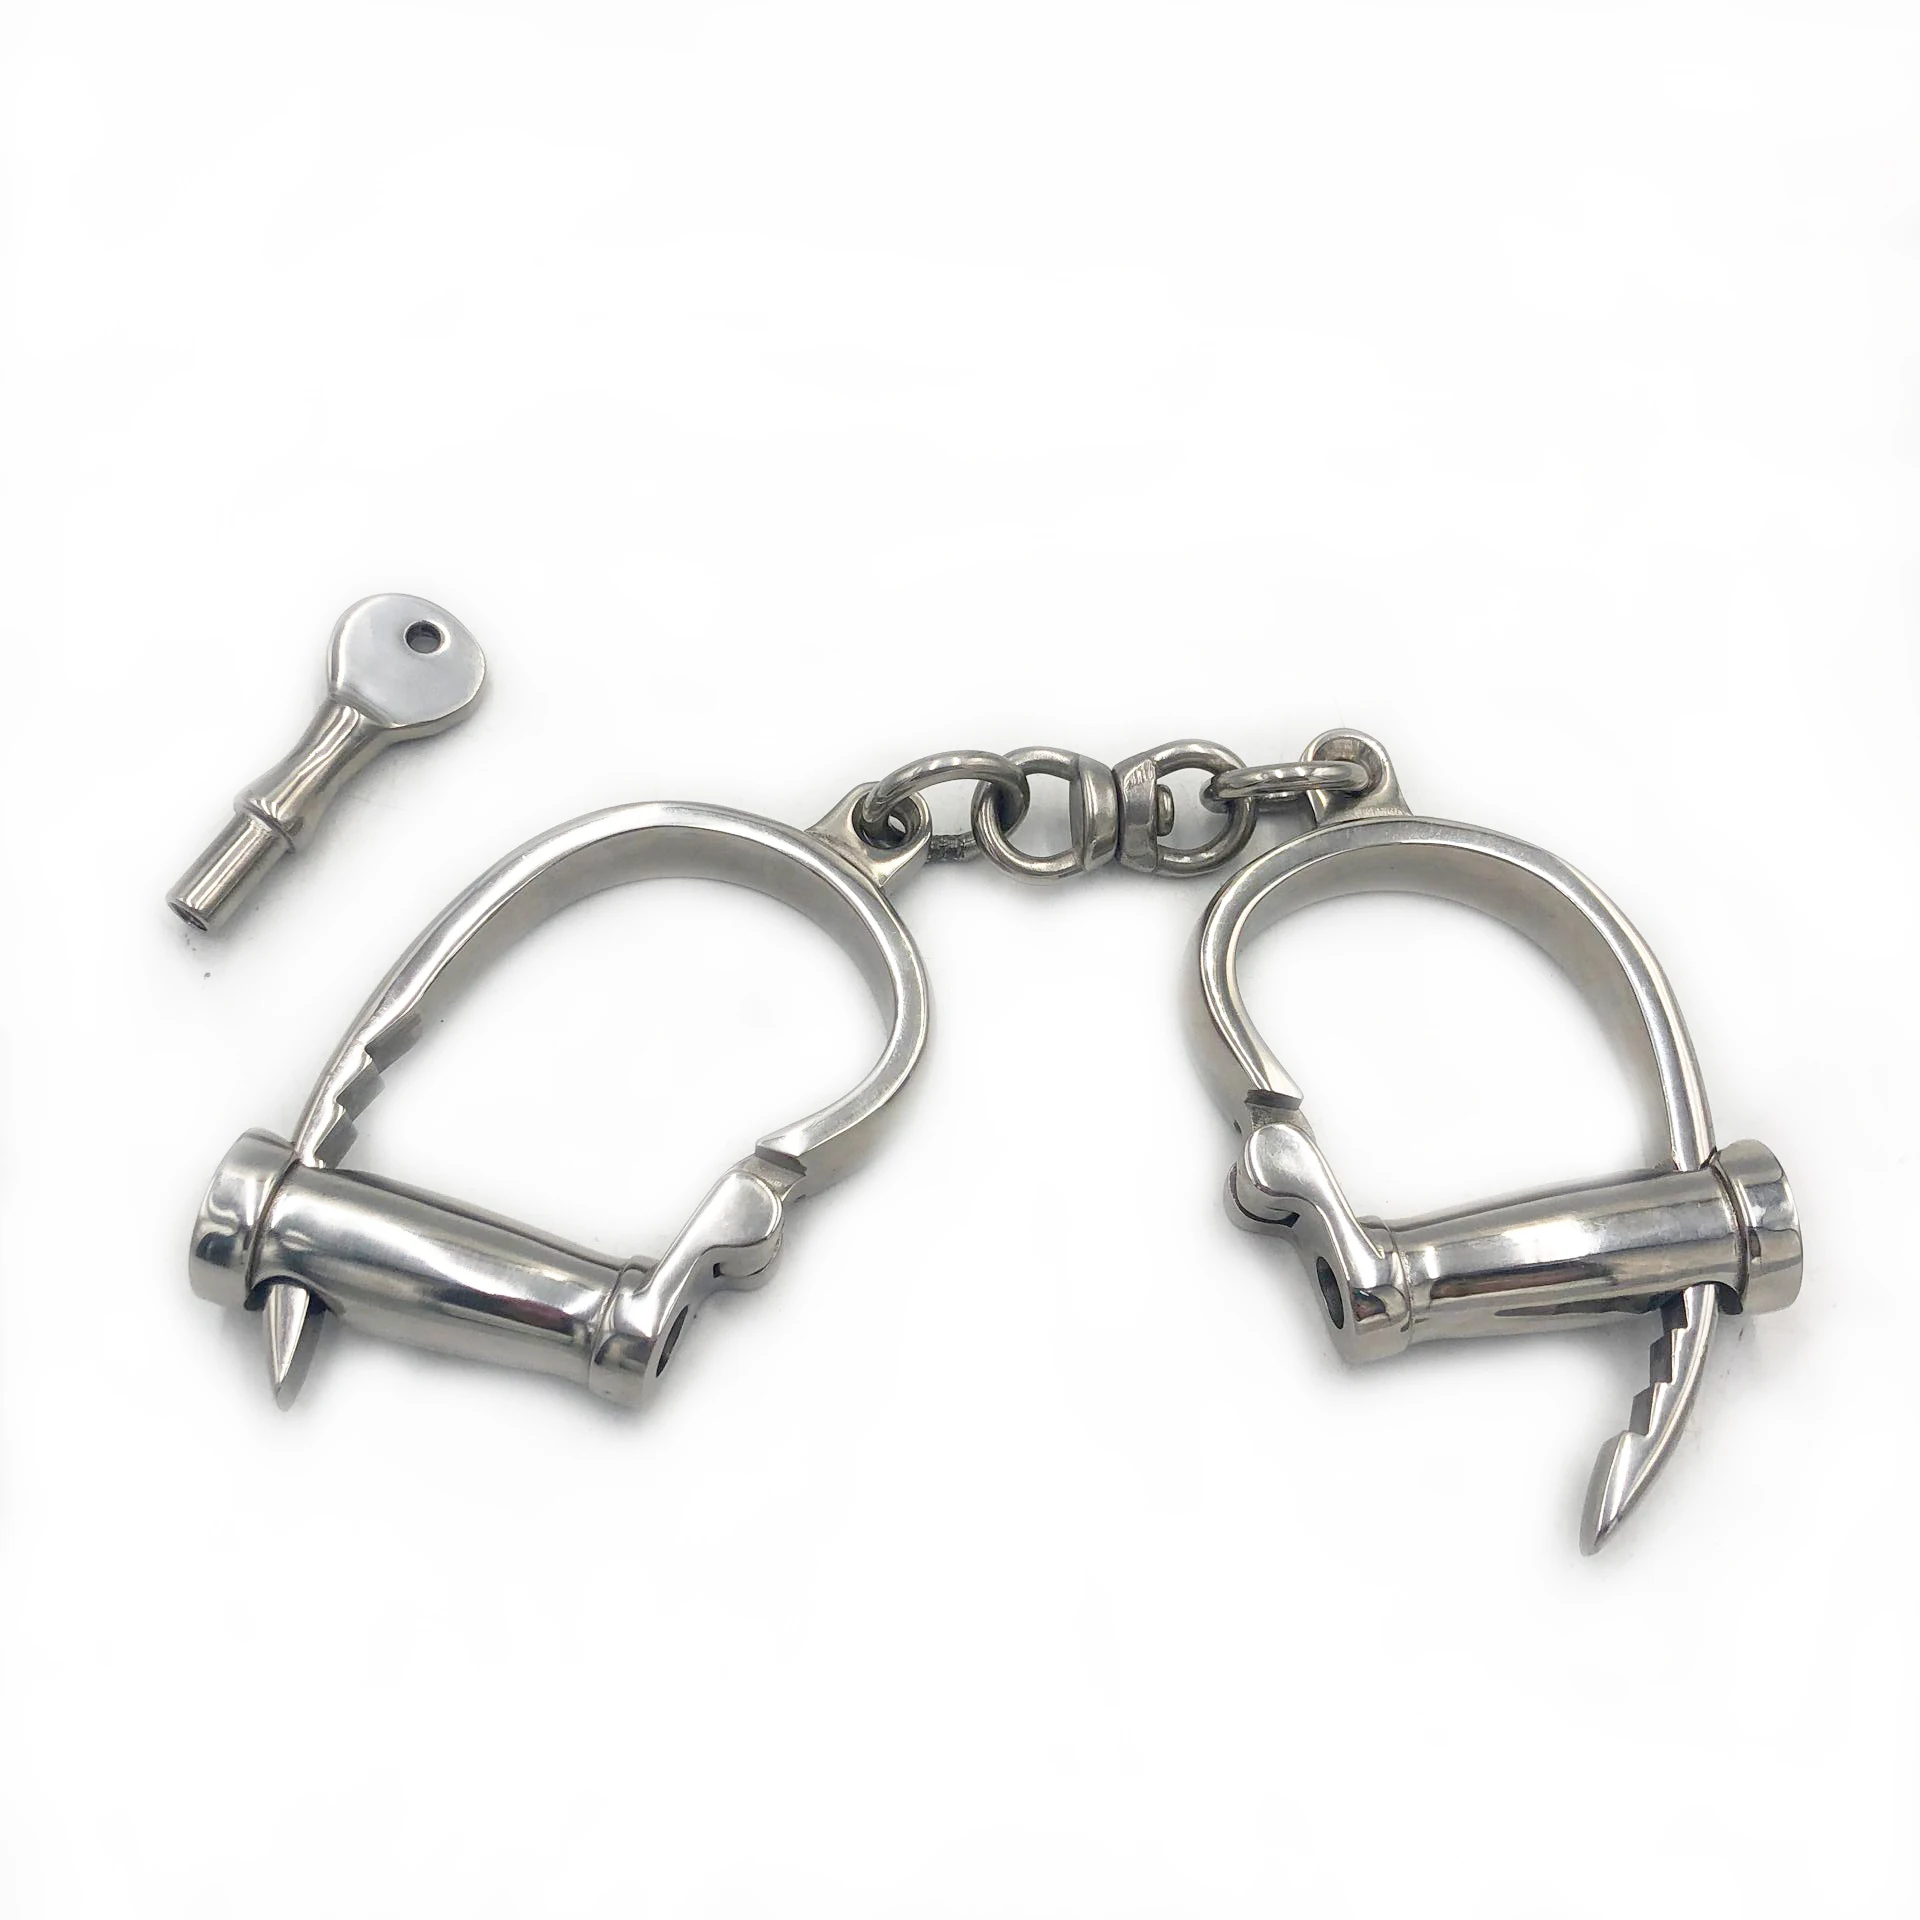 

Black emperor SM toys new stainless steel unisex horseshoe handcuffs adult fun couple supplies exquisite alternative